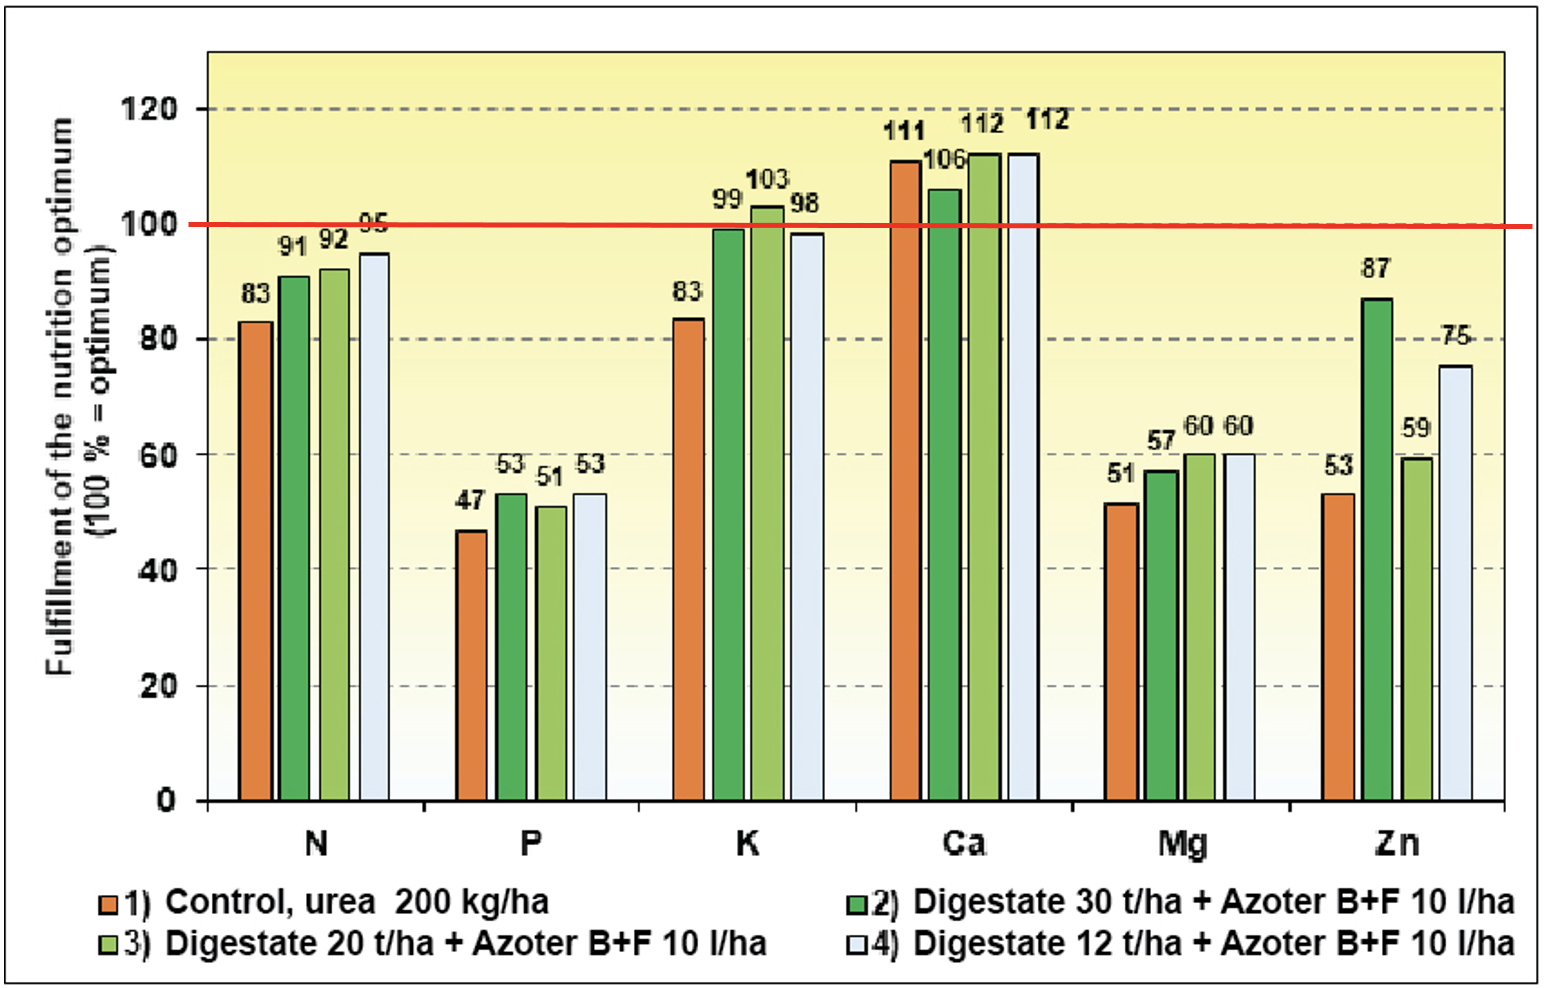 Graph 2. The effect of AZOTER B F bacterial fertilizer and digestate application from the biogas plant before sowing on the nutritional status of maize plants in the period of crop involvement